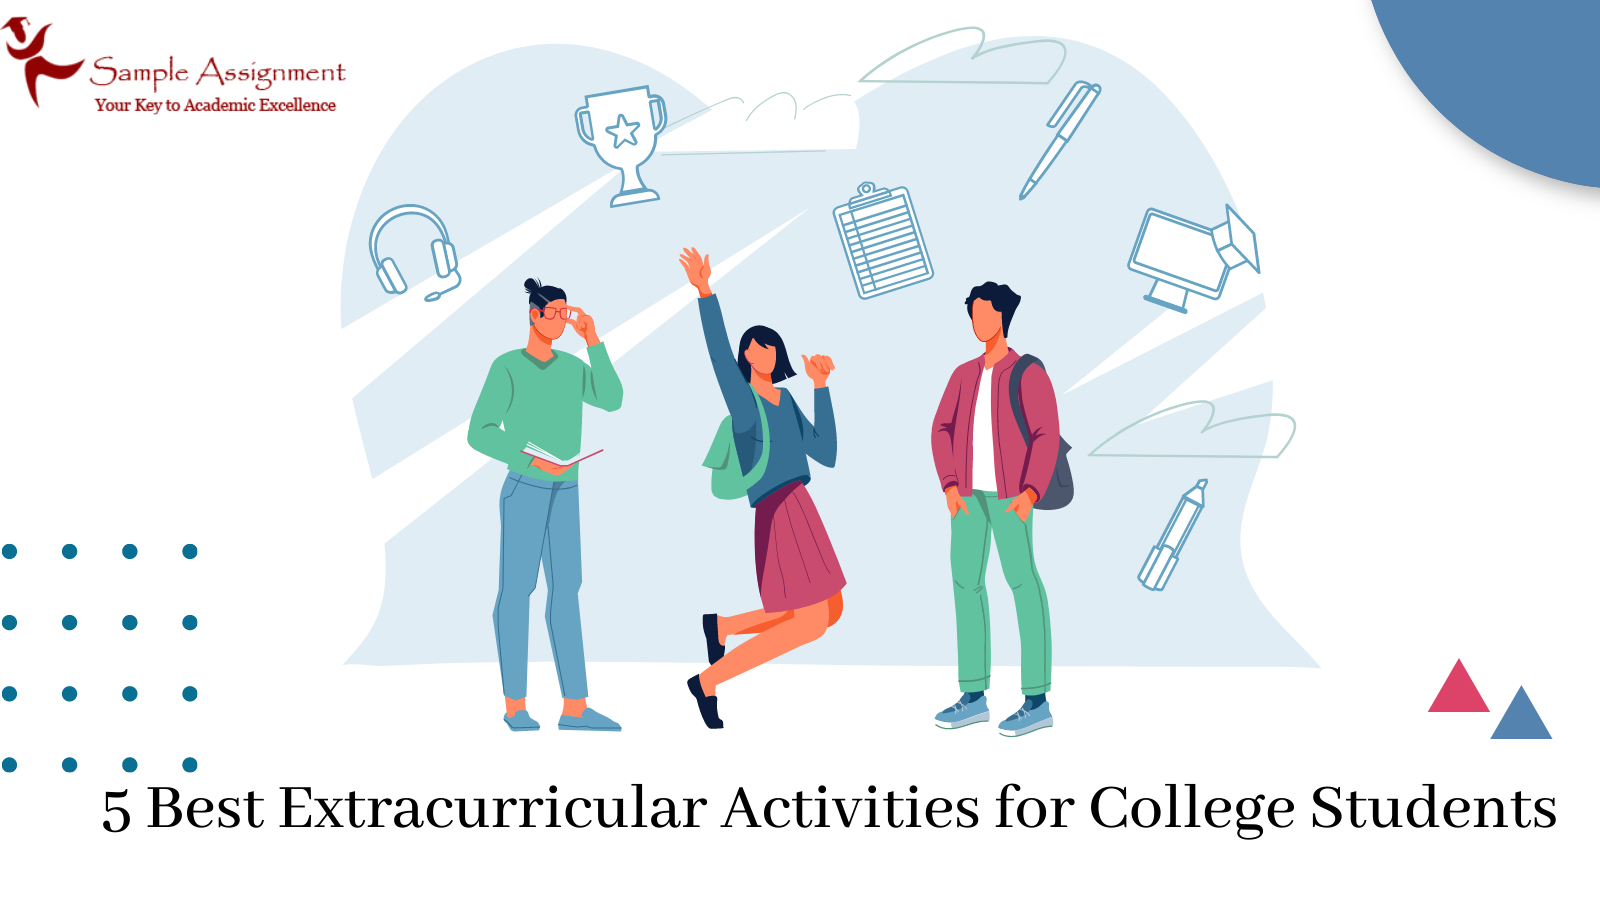 5 Best Extracurricular Activities for College Students